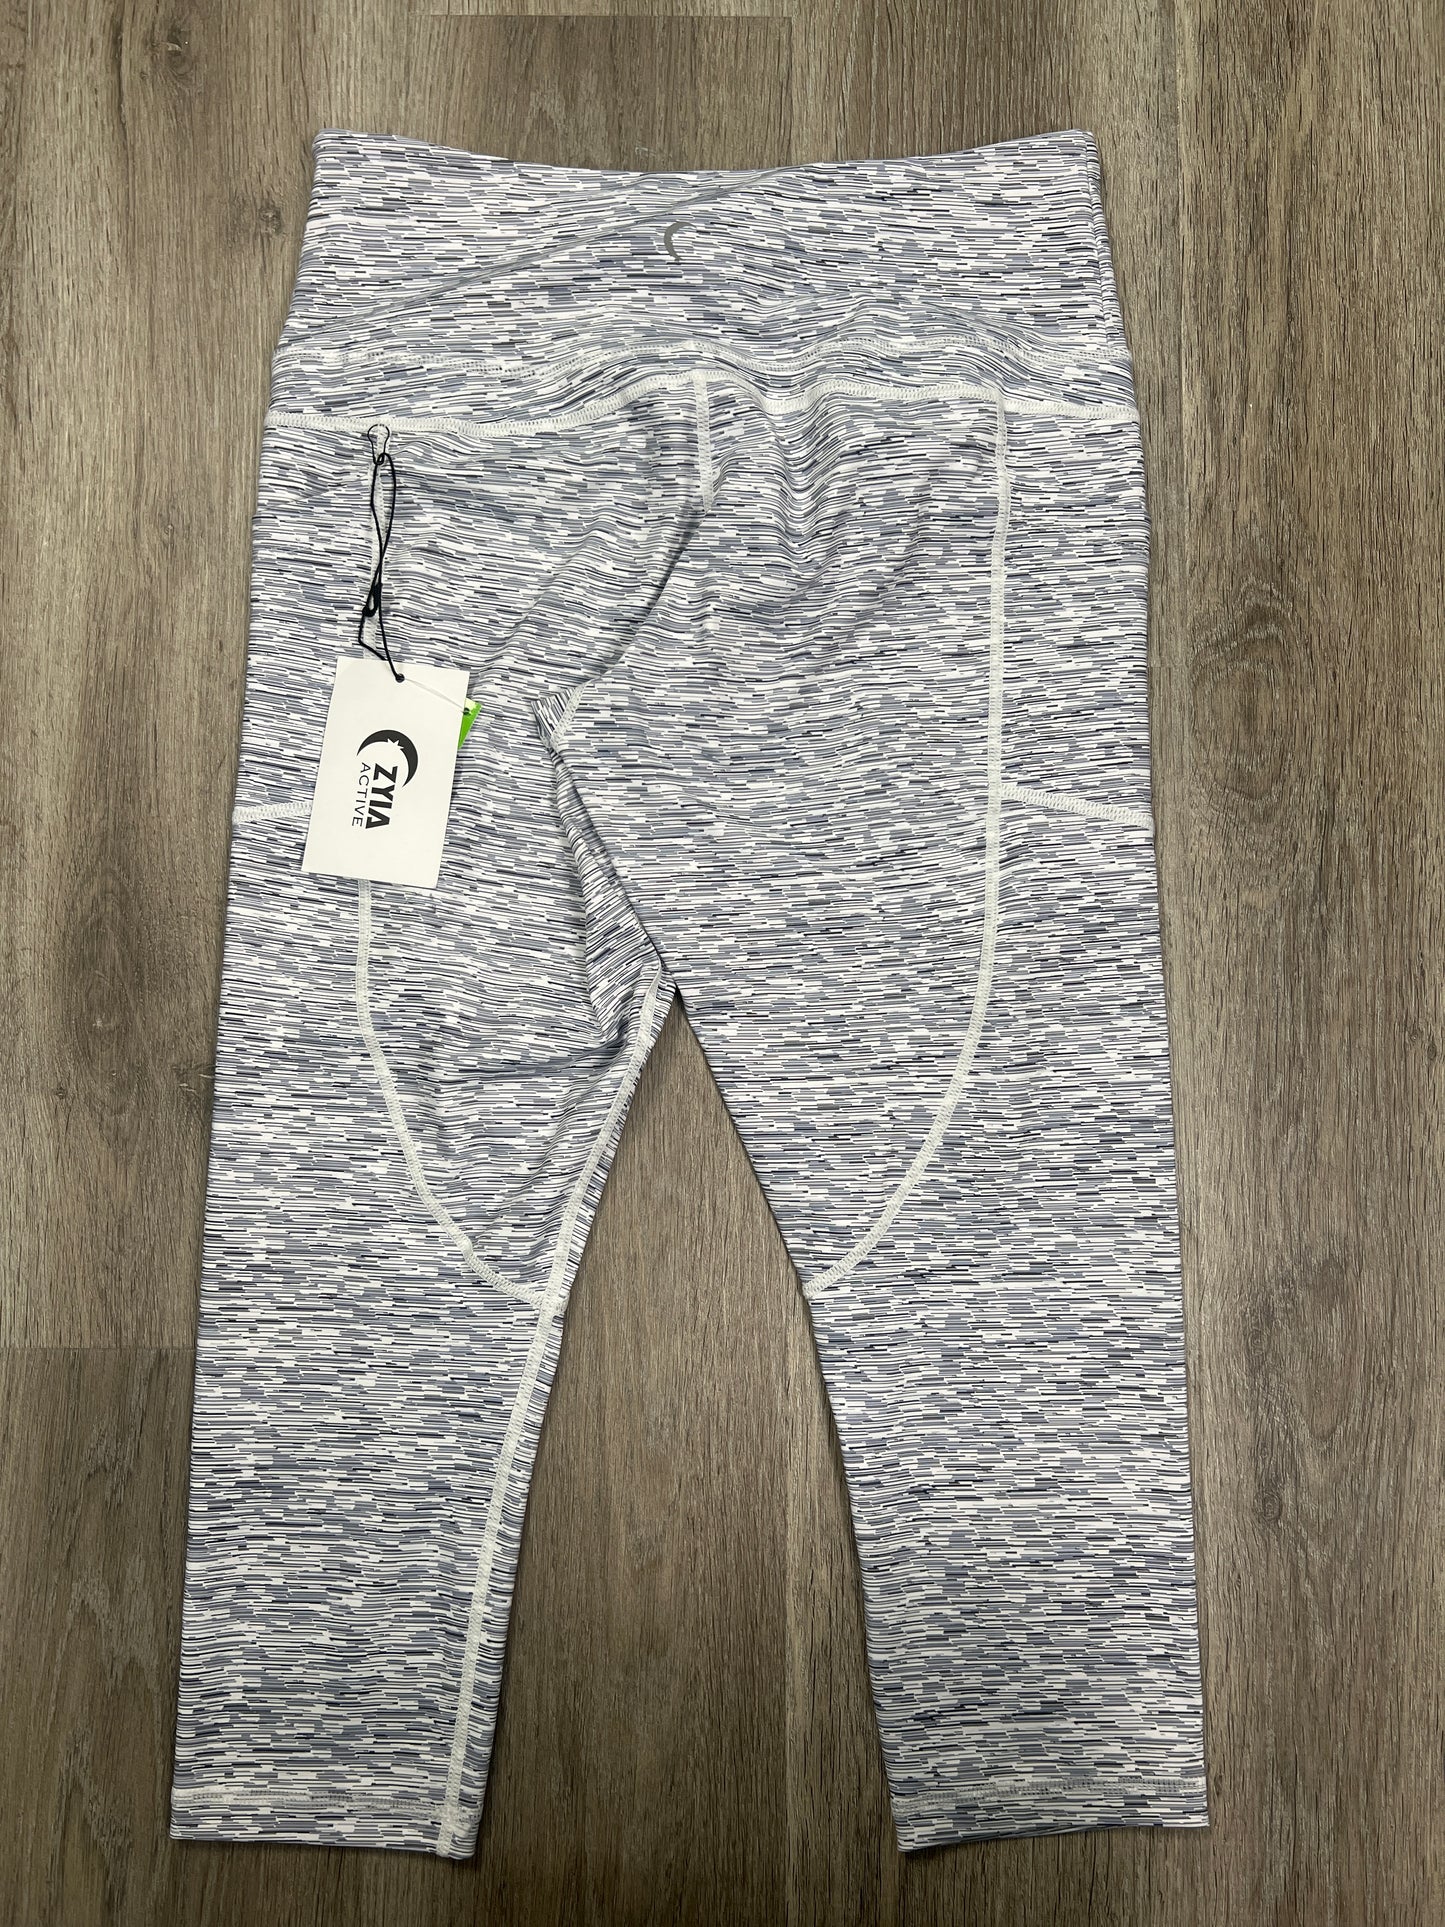 Athletic Leggings Capris By Zyia  Size: M